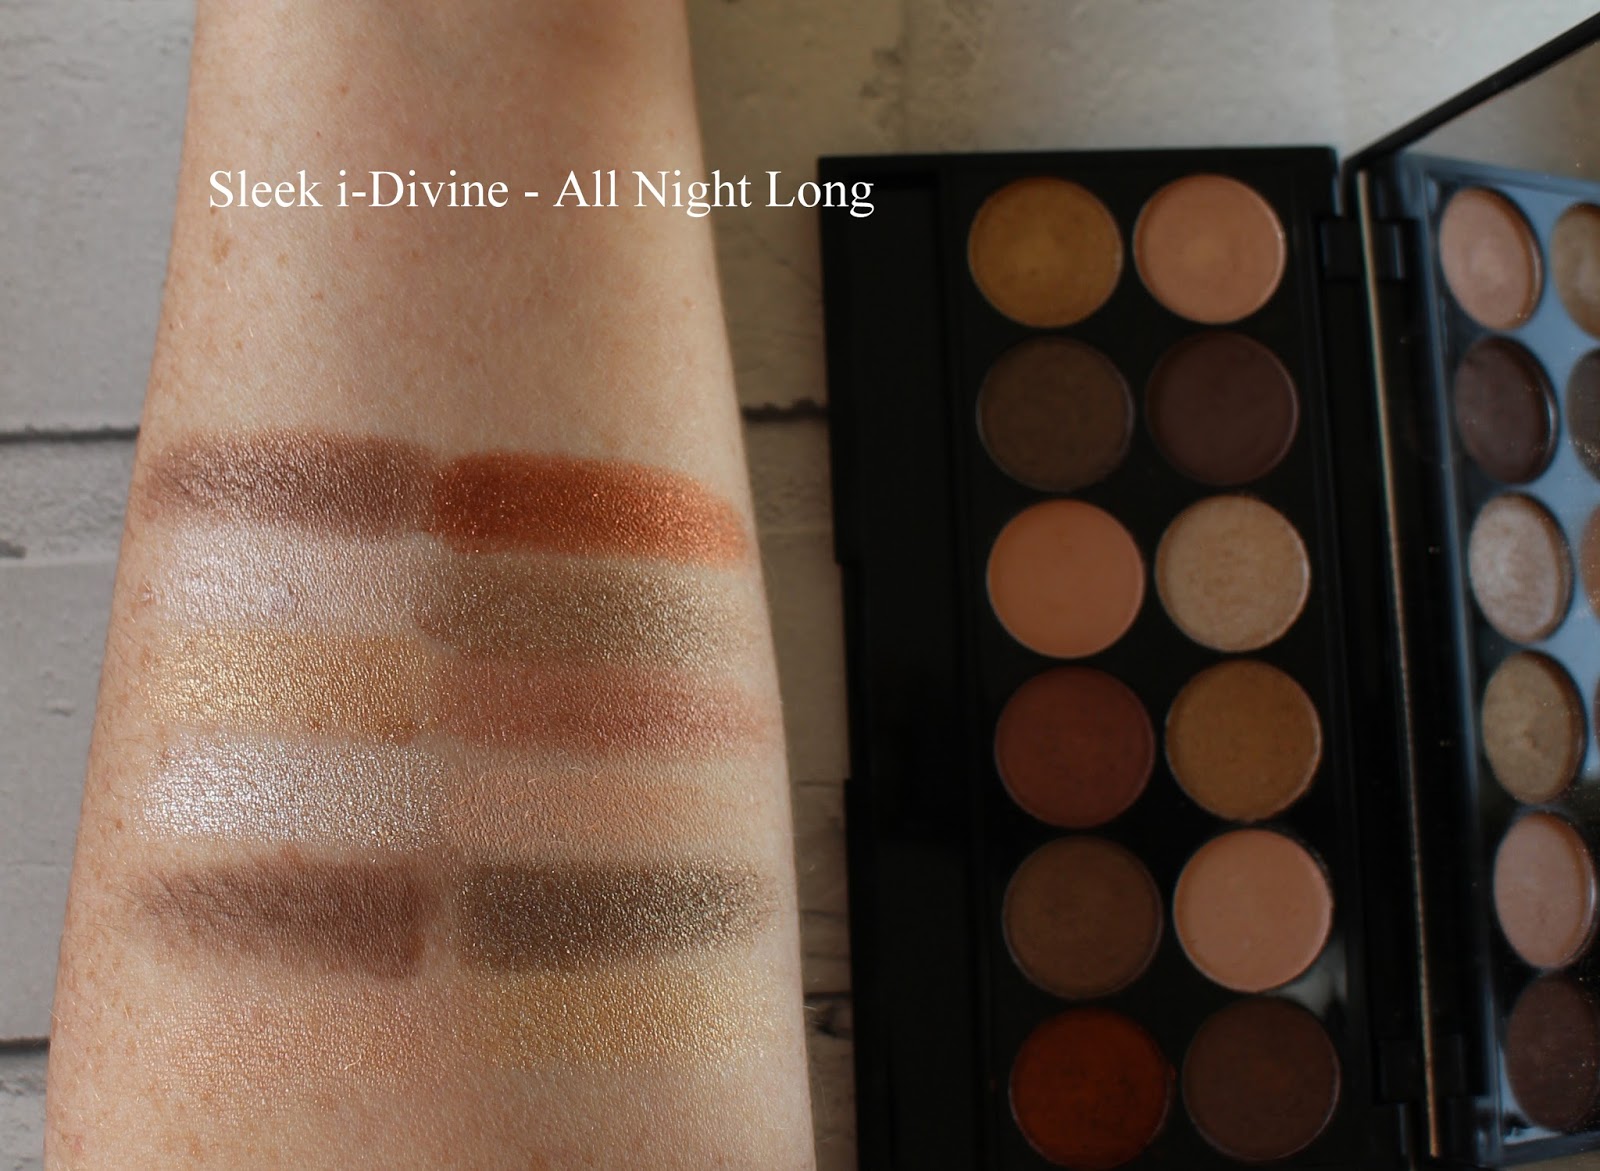 Dyster lur Medarbejder NEW: Sleek i-Divine Palettes - A New Day & All Night Long - Review &  Swatches | Strawberry Blonde